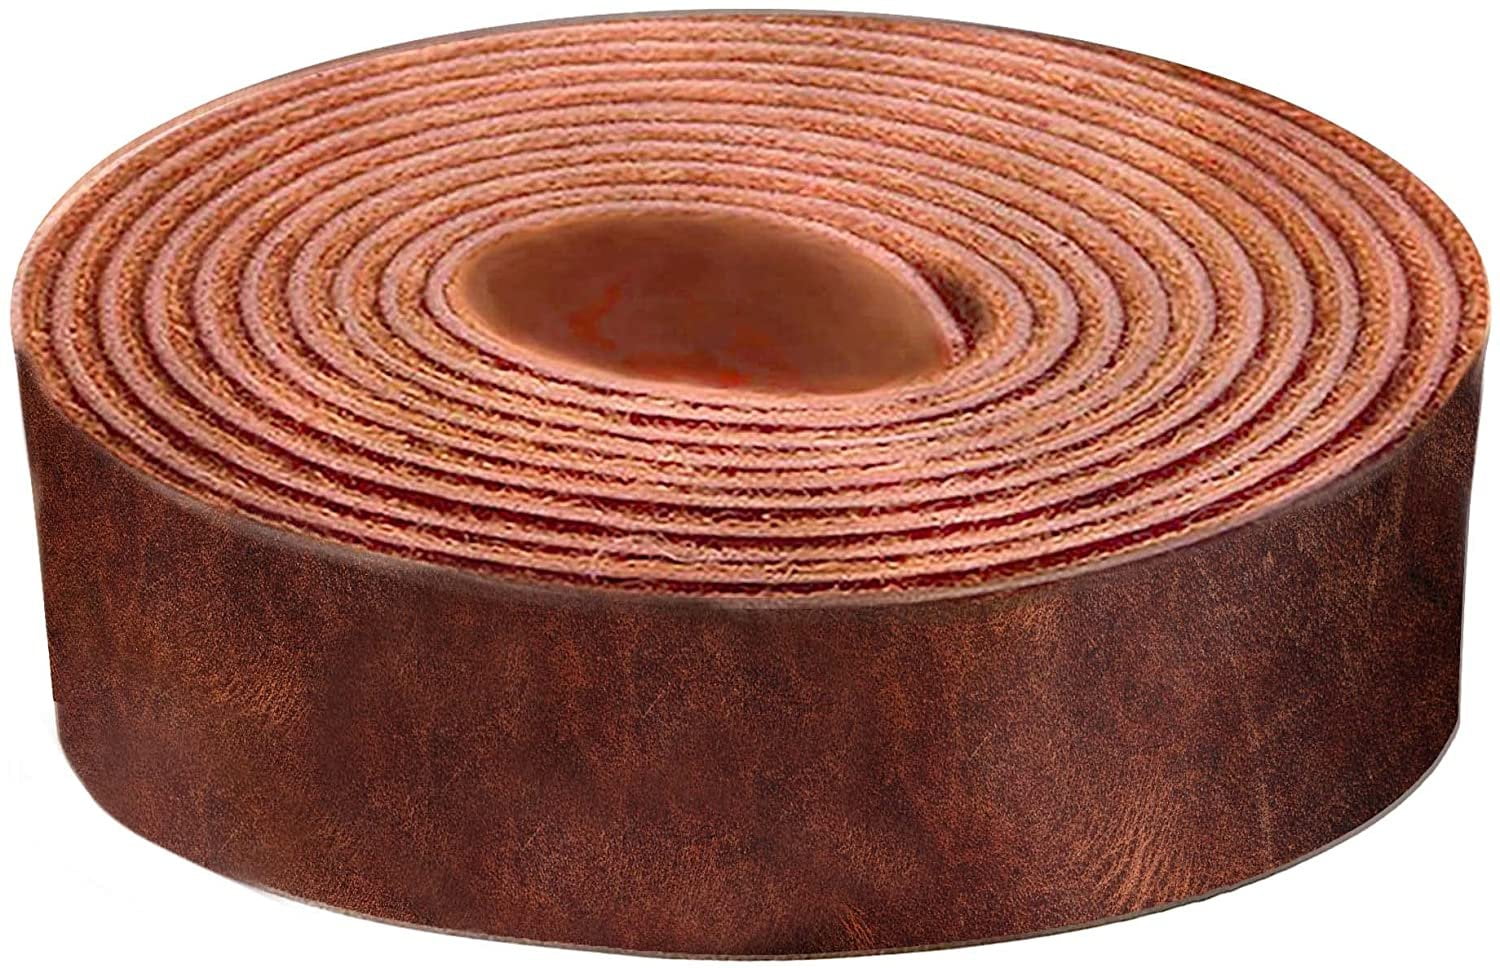 Choose 48 3.2 mm-3.6 mm Extra Long Leather Strips Great for Straight Razor Strops-Belts 60 72 or 84 Long Leather Strips 2 Inch Wide Leather Strips Russet 8-9 oz 2 x 24 